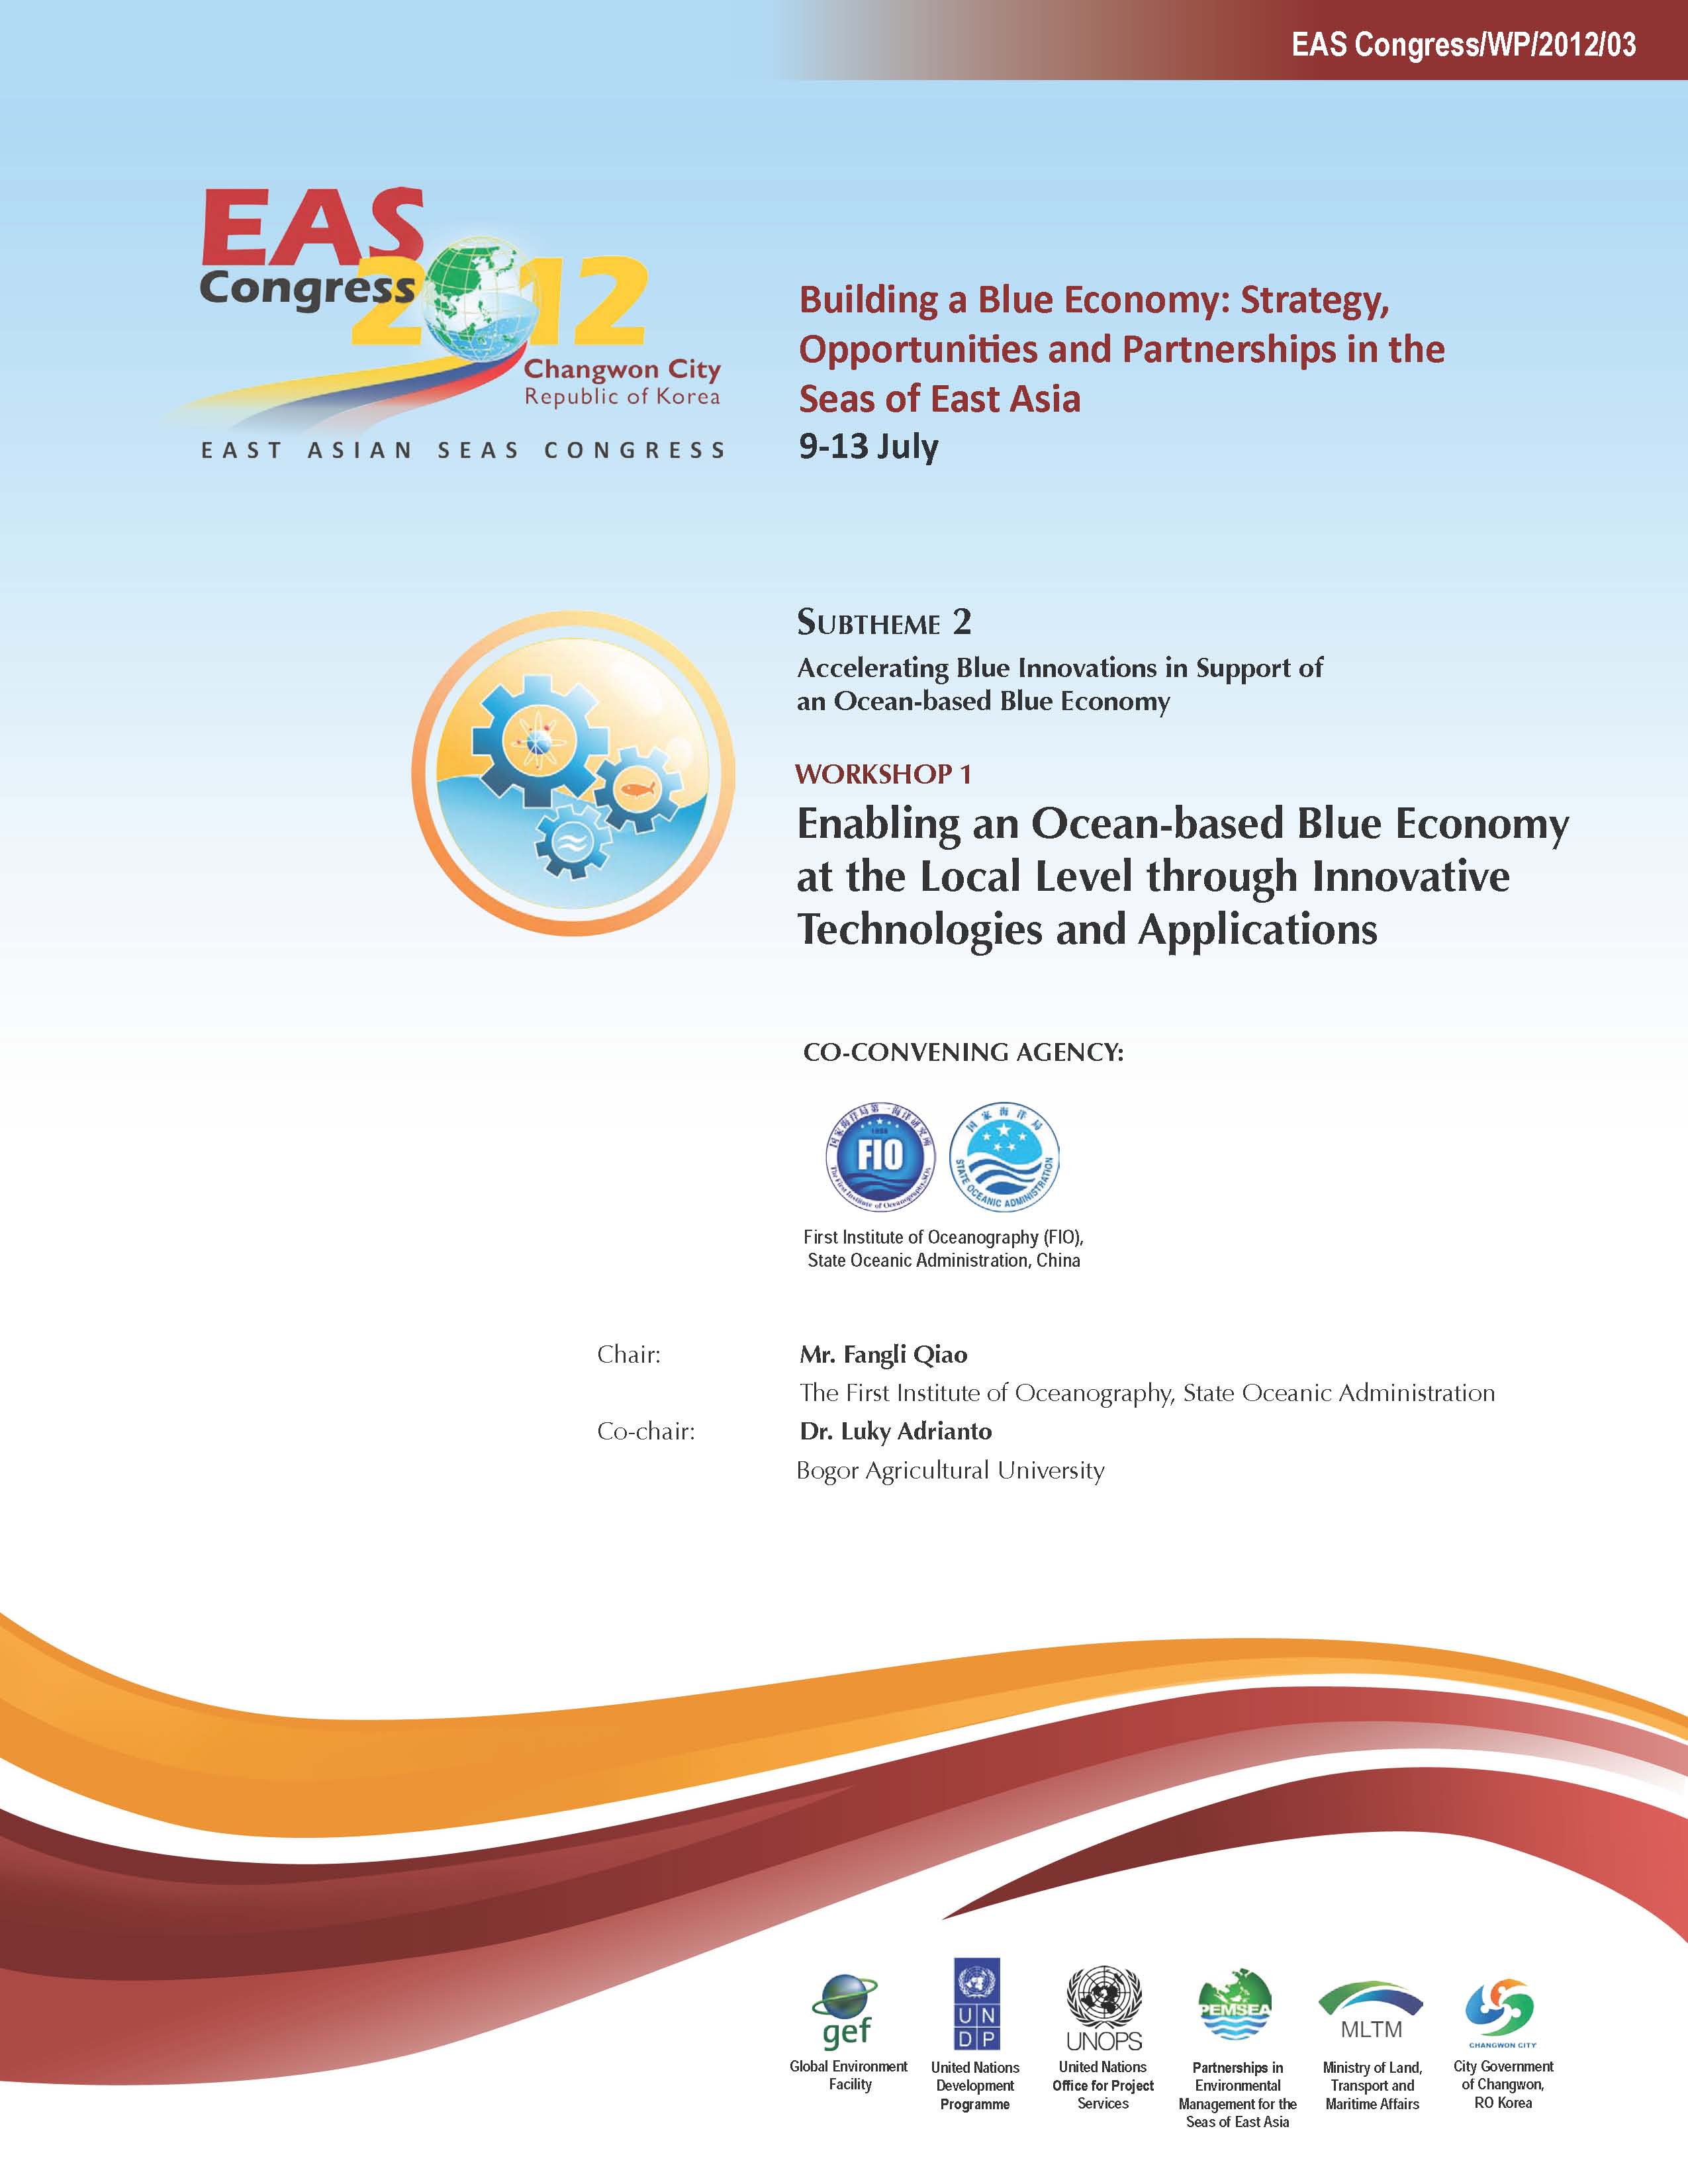 Proceedings of the Workshop on Enabling an Ocean-based Blue Economy at the Local Level through Innovative Technologies and Applications